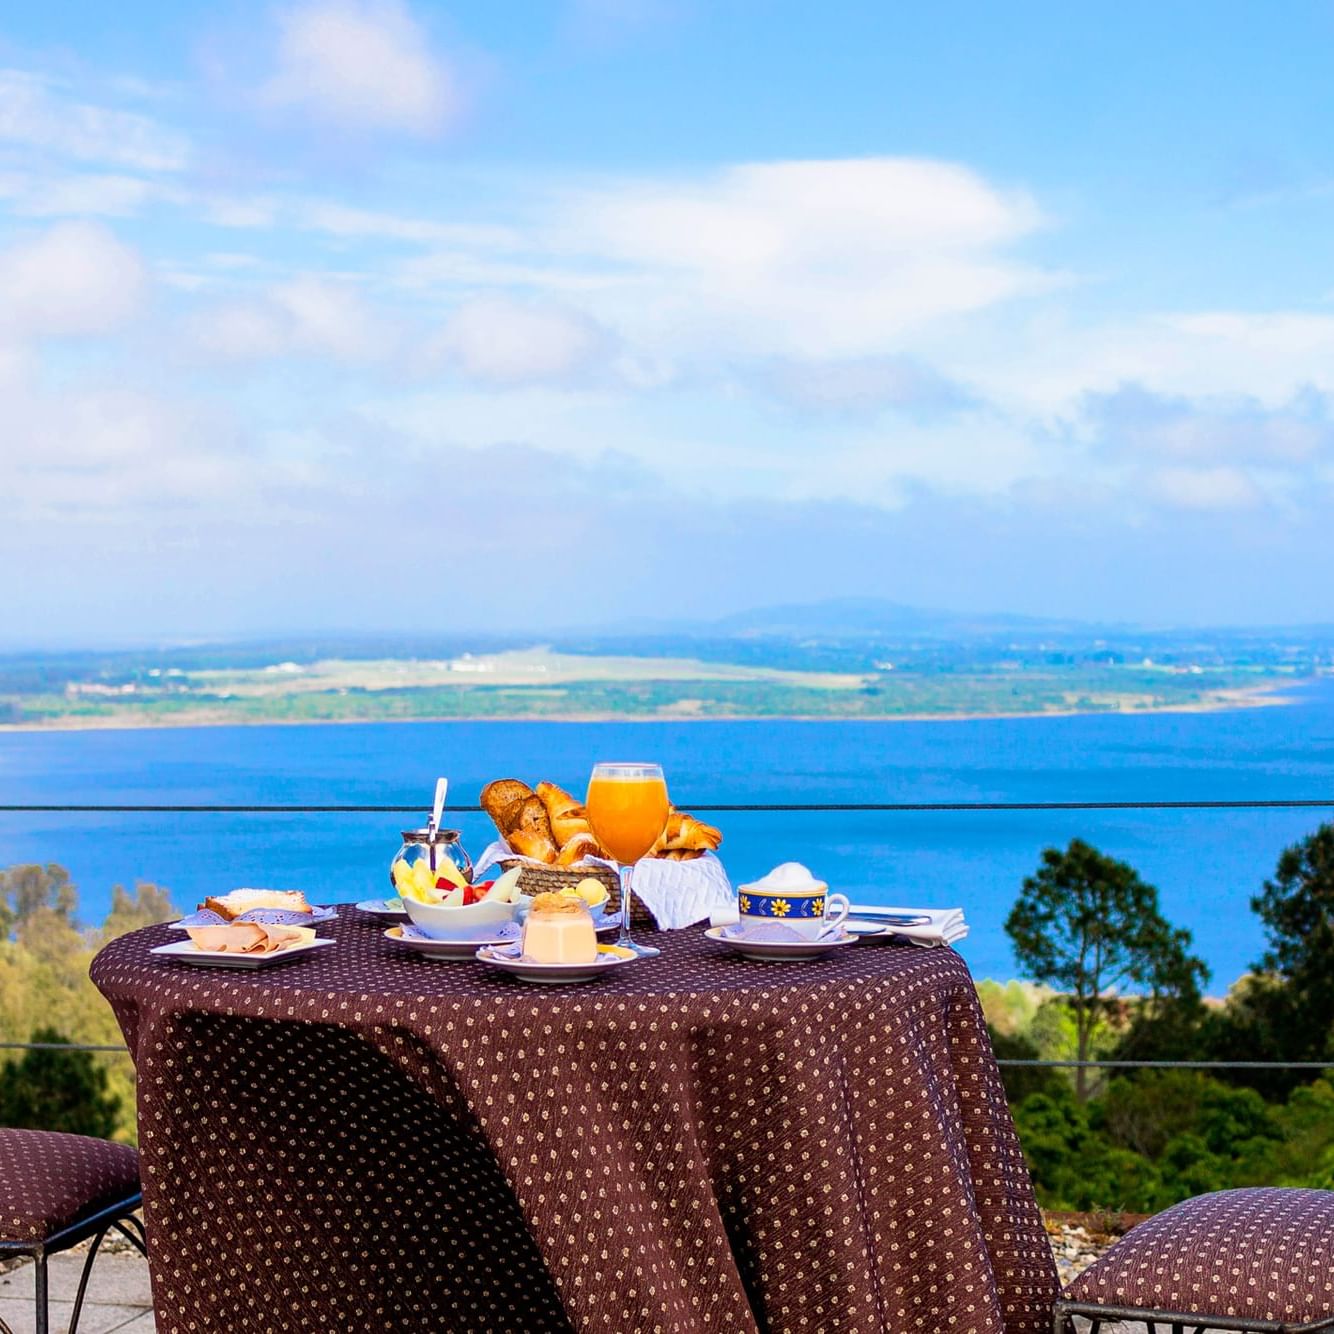 Breakfast served on the terrace with beach views at Las Cumbres